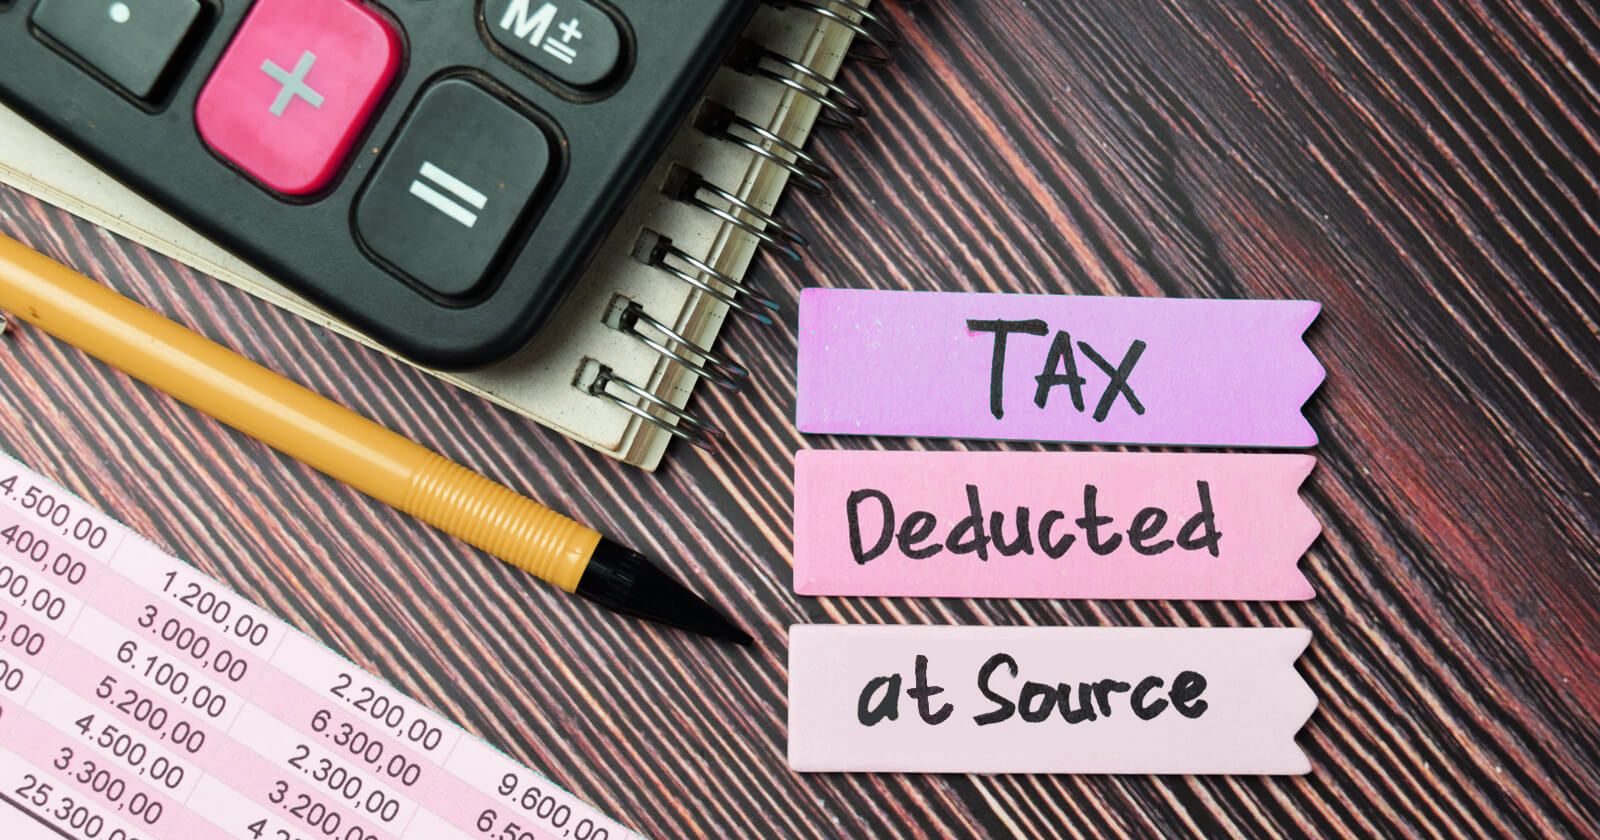 TDS (Tax Deducted at Source) TDS Types, TDS Rates, and much more!